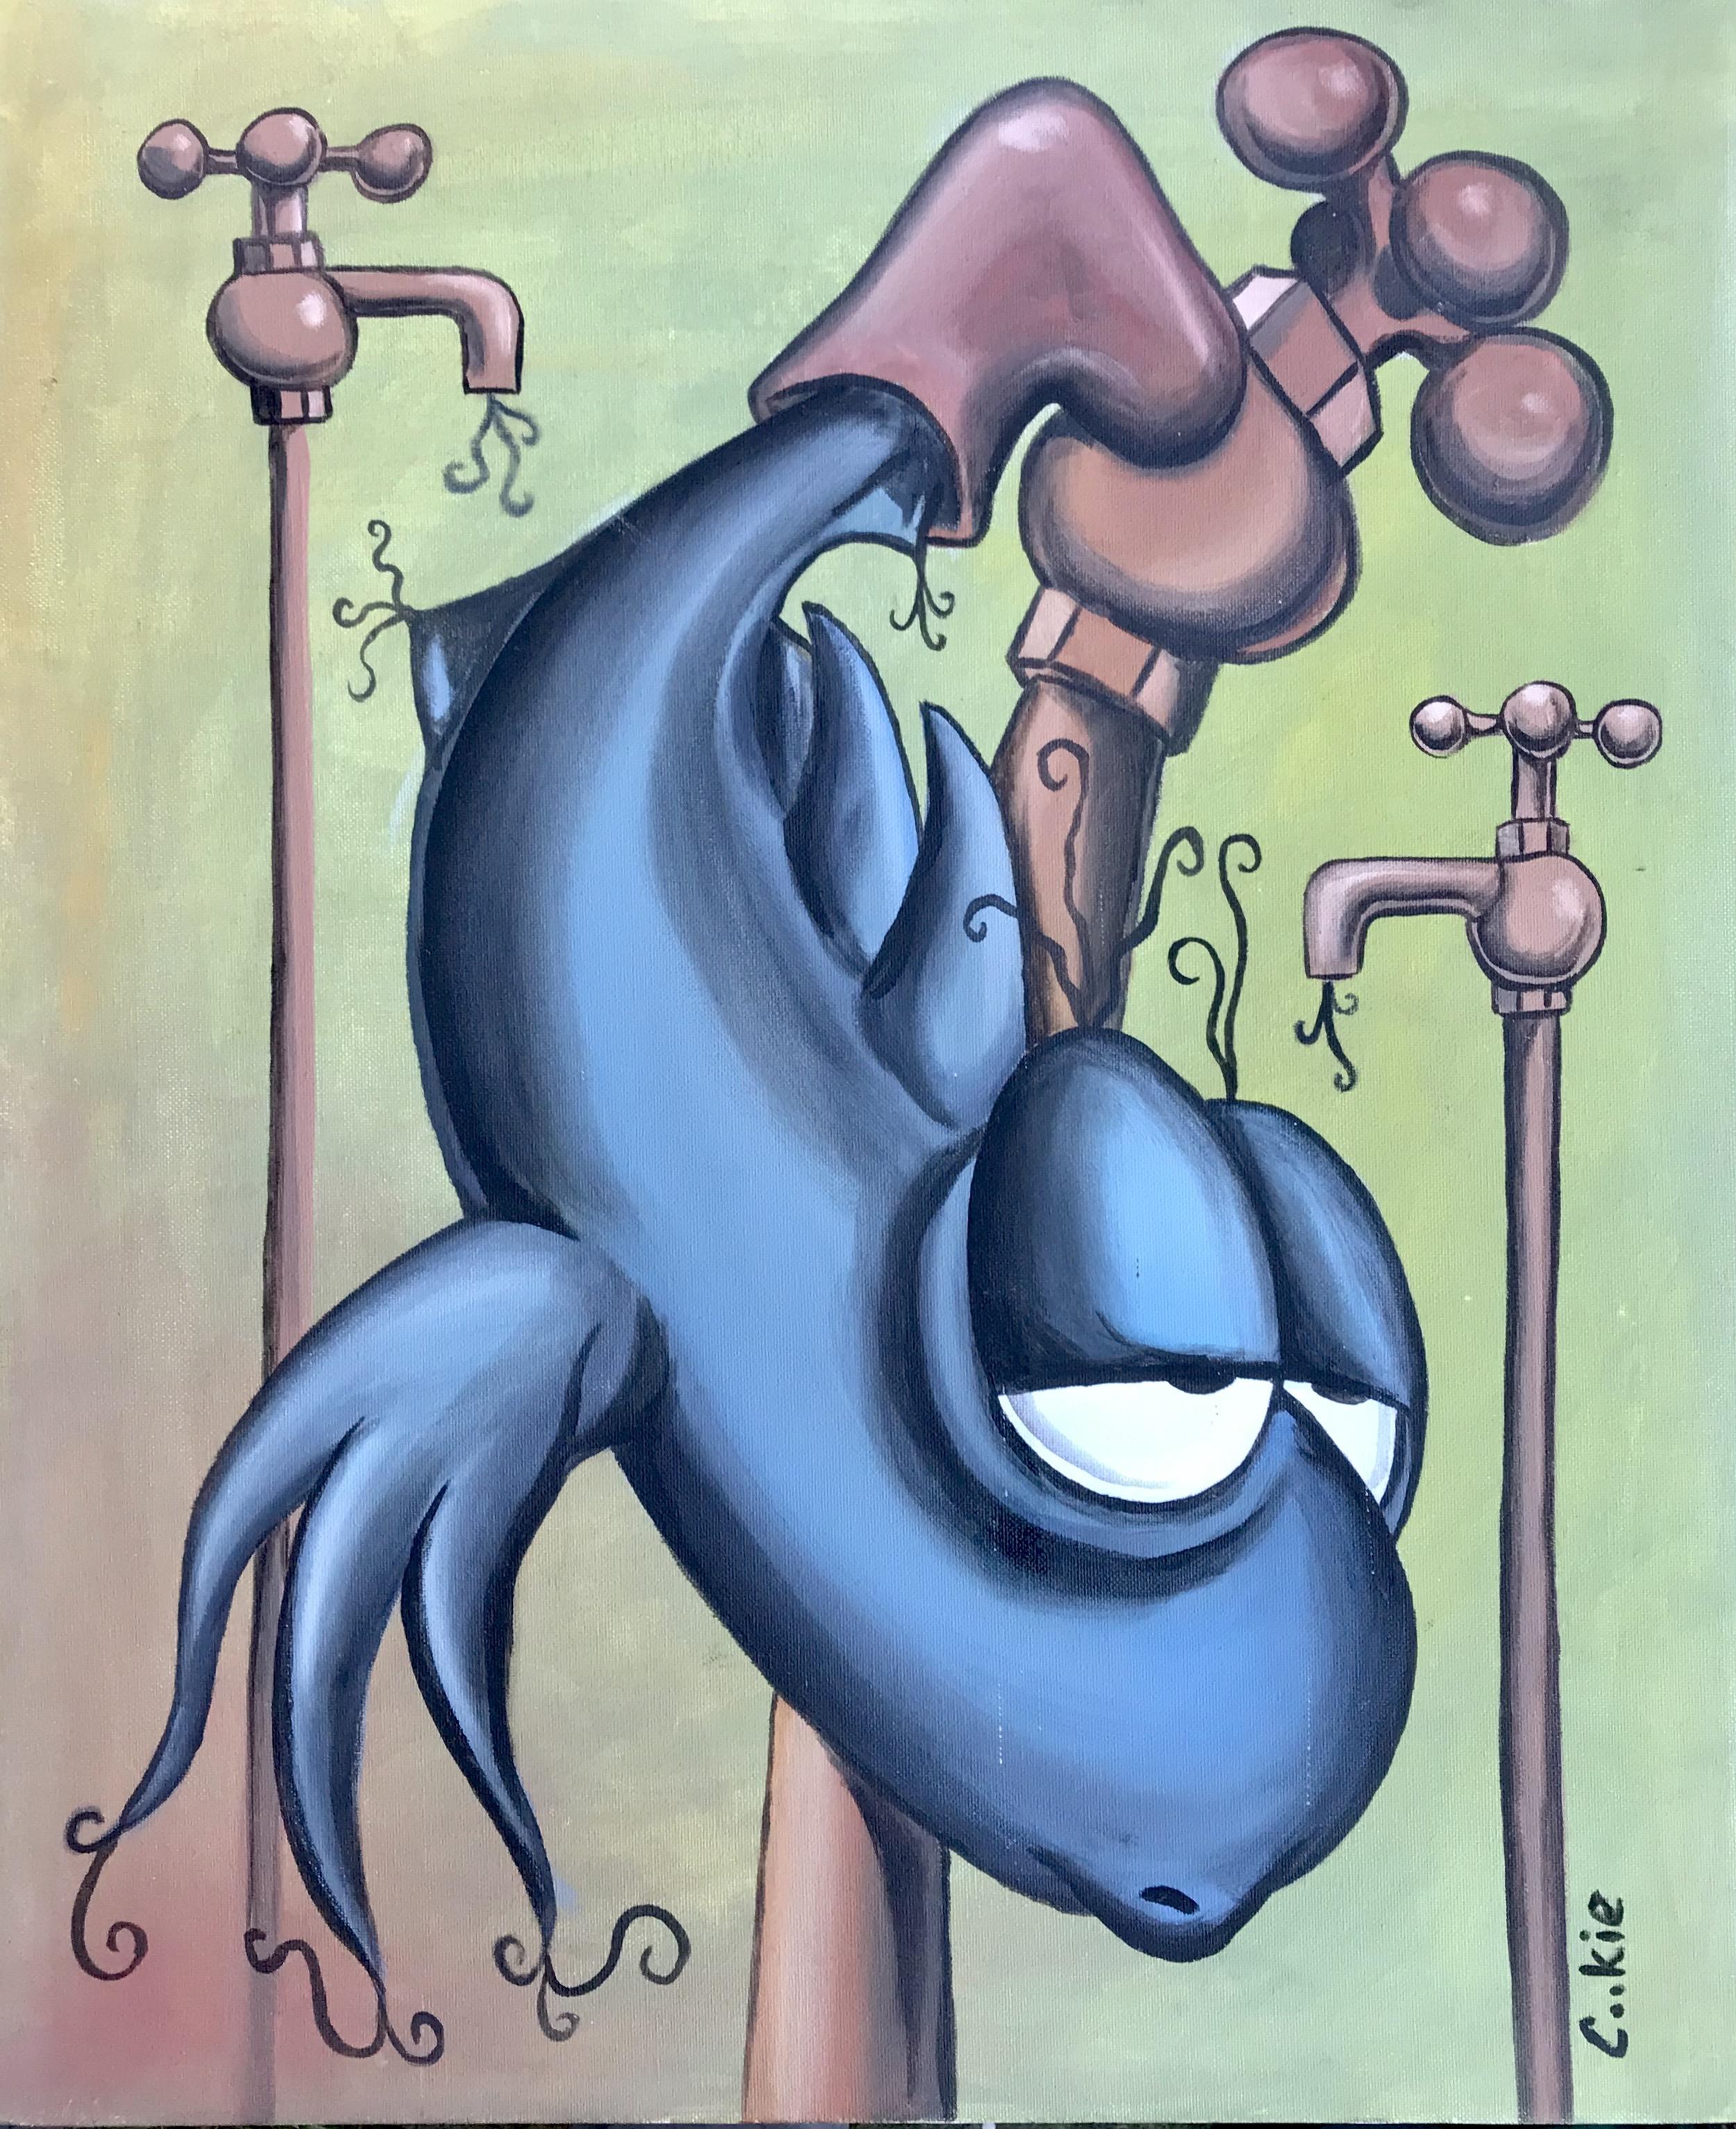 On tap dopey eyed fish by cookie acrtoonery